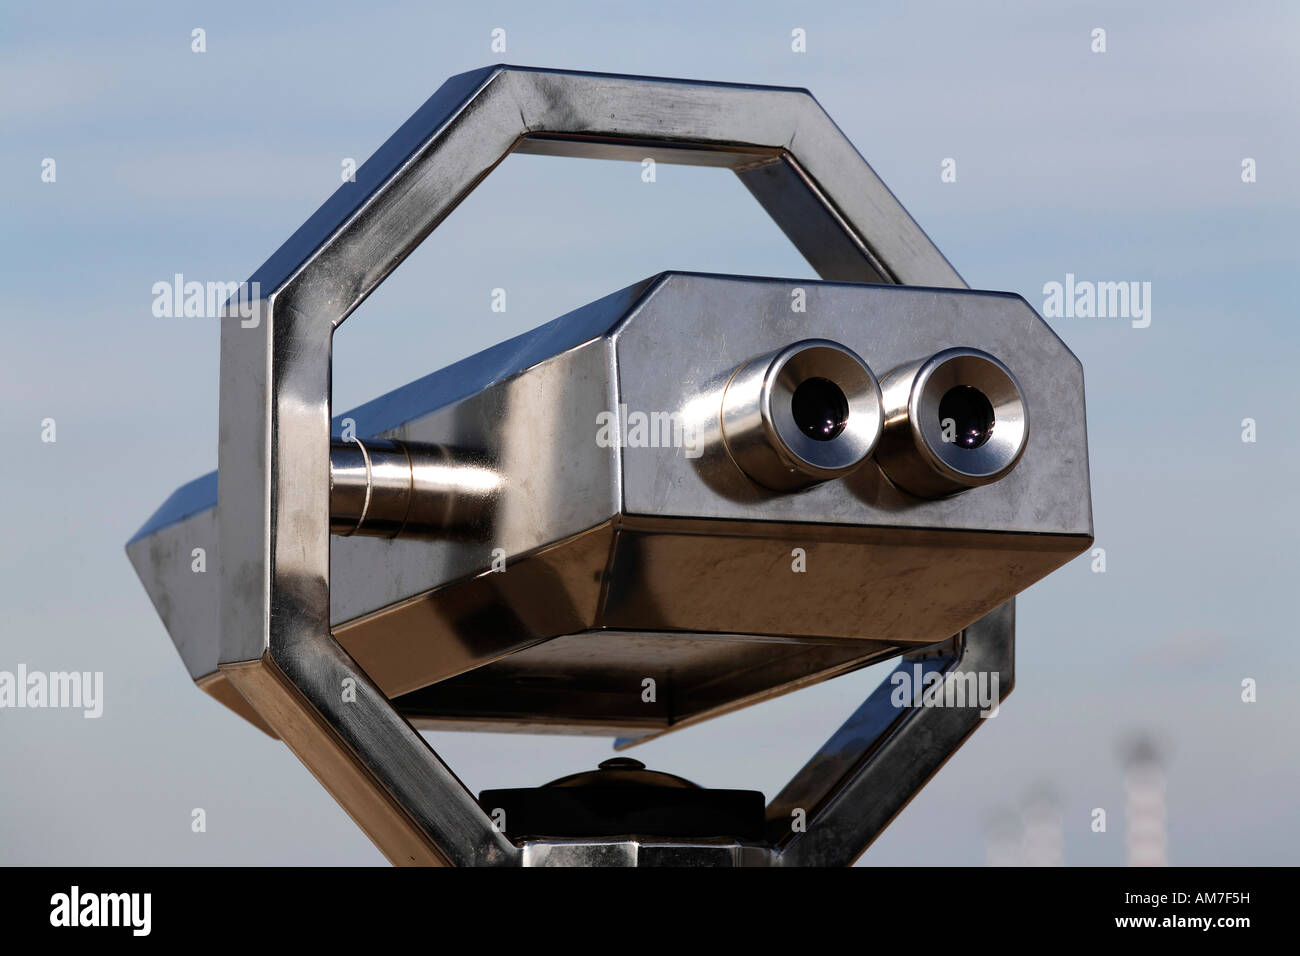 Modern coin telescope, observation terrace, airport Duesseldorf, NRW, Germany Stock Photo